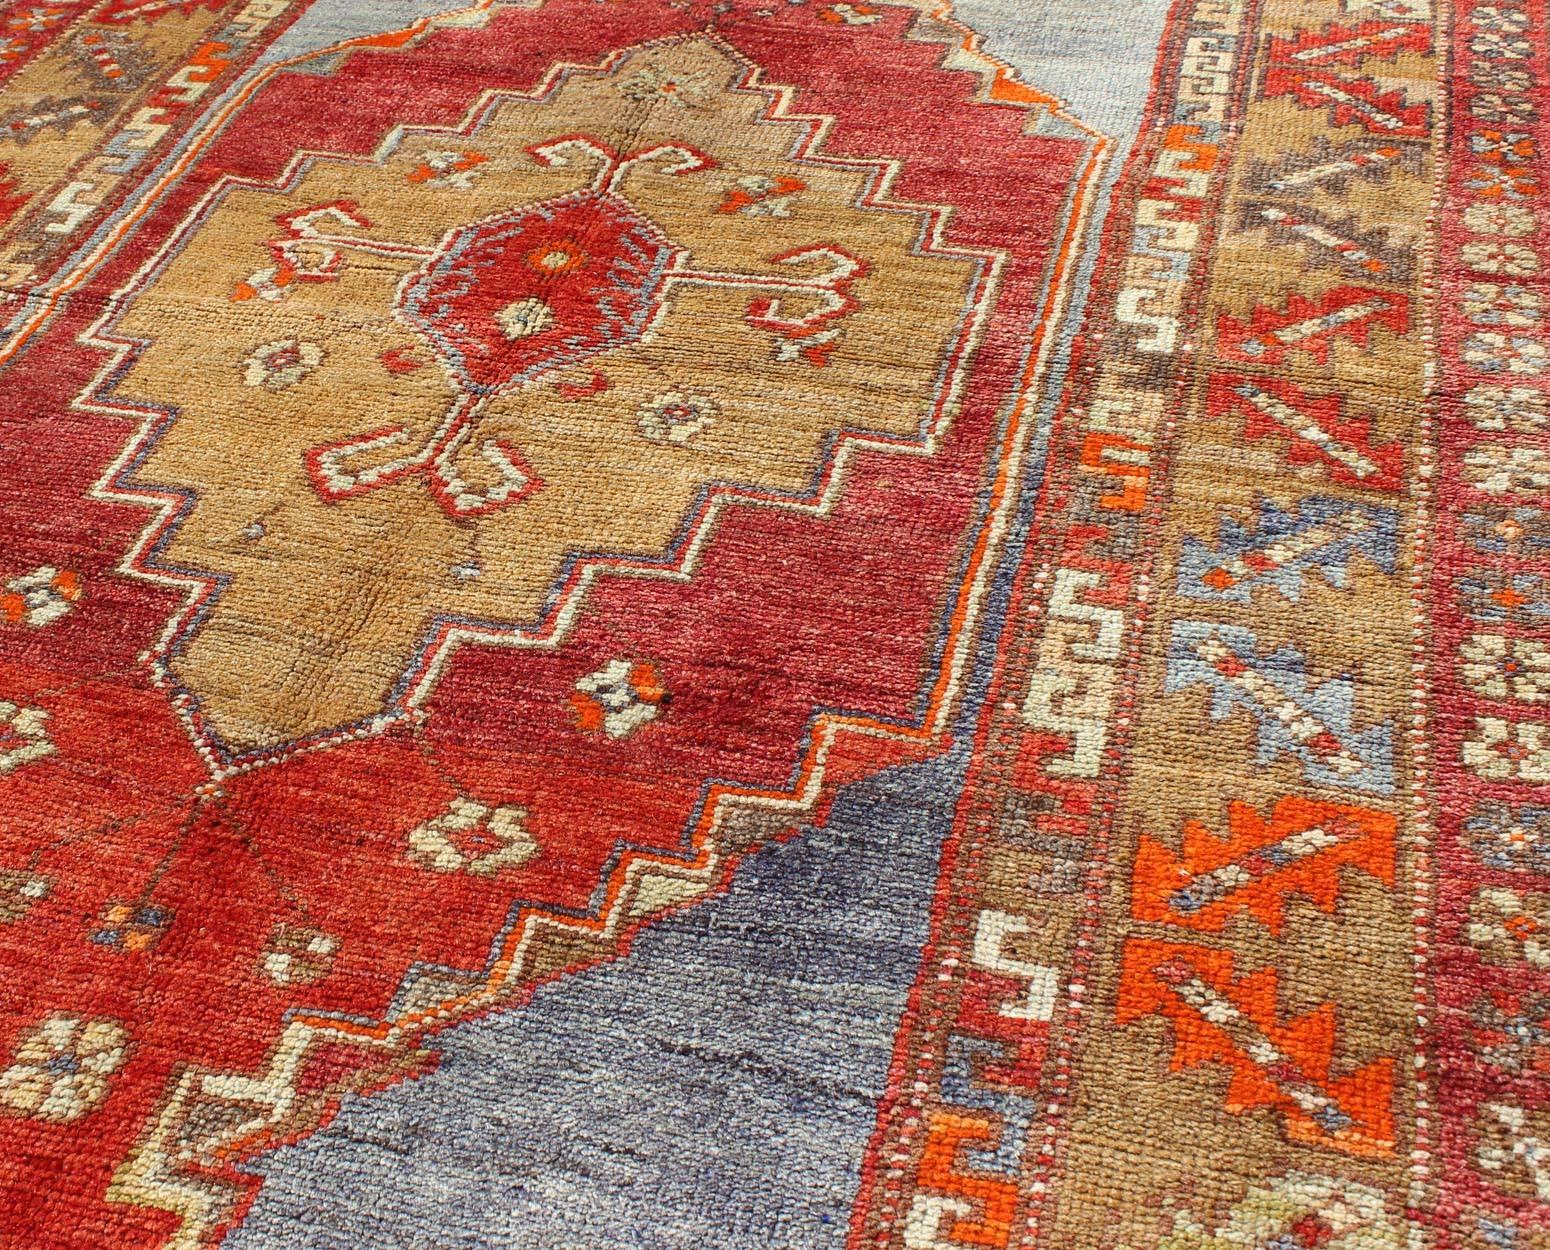 Mid-20th Century Multicolored Vintage Turkish Oushak Rug in Red, Blue and Soft Orange Colors